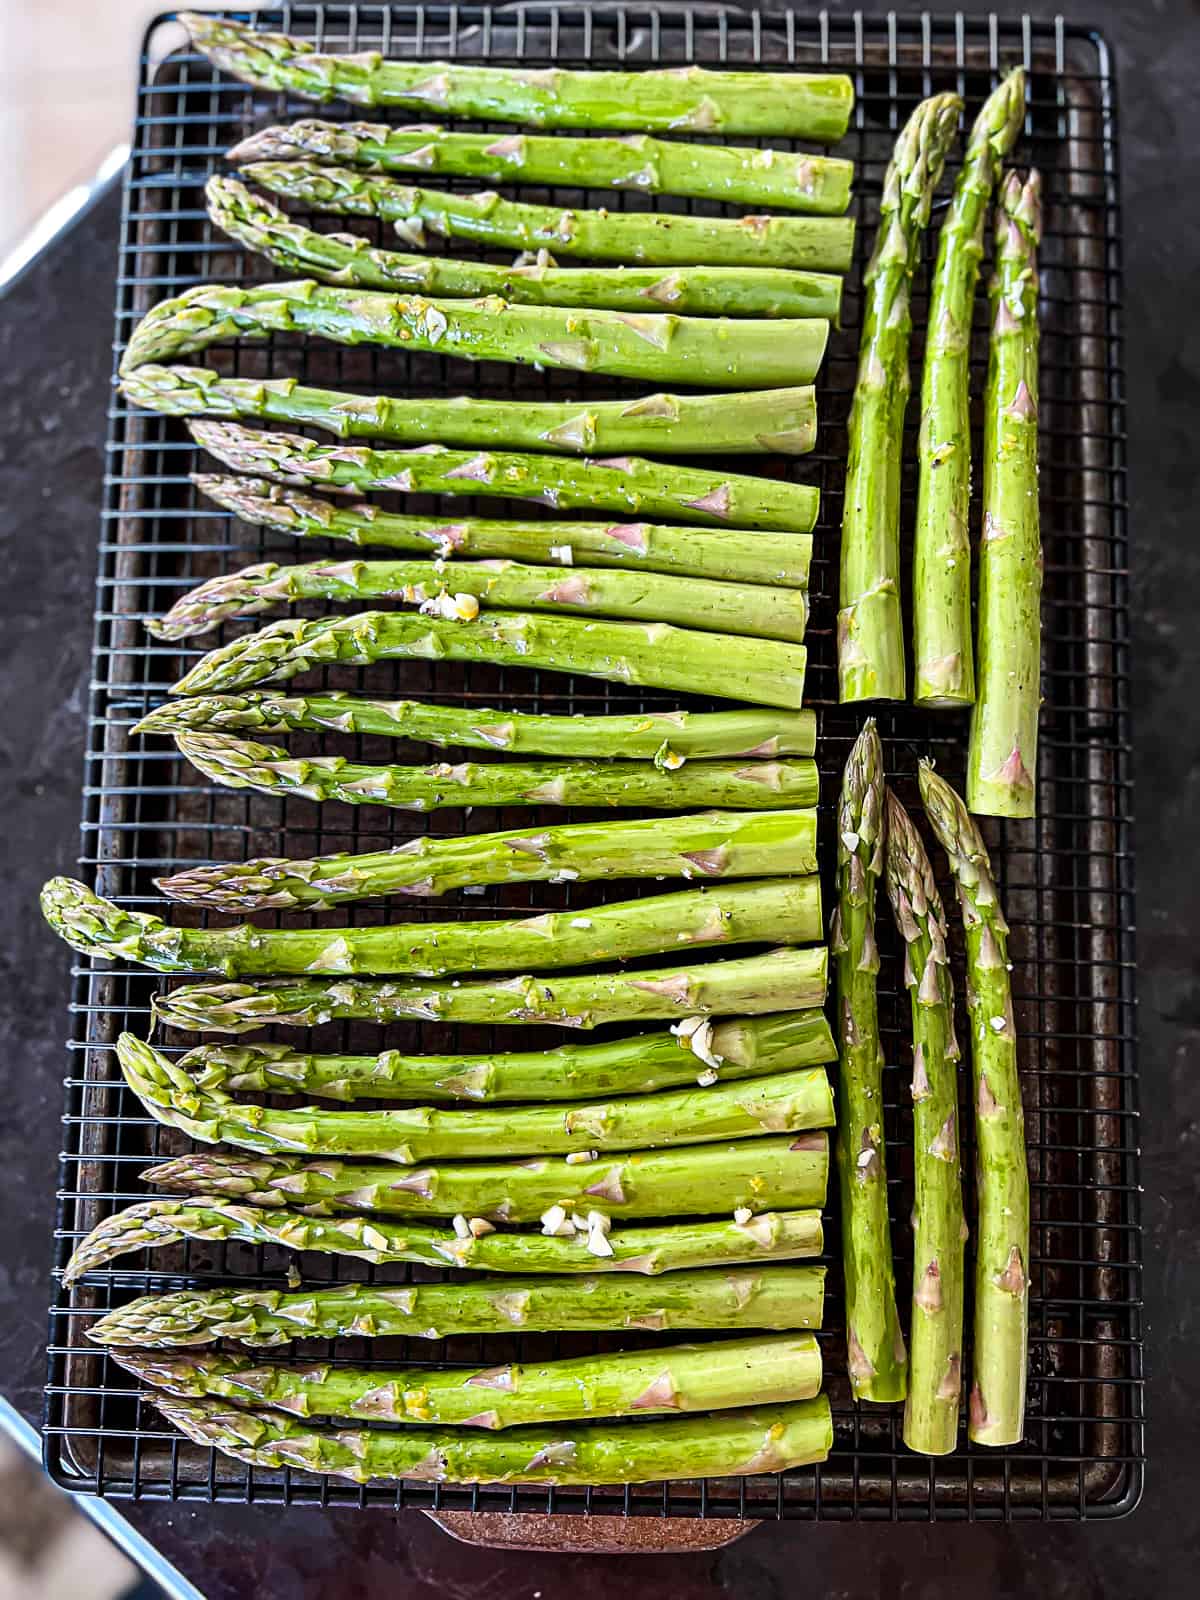 Preparing Smoked Asparagus On A Rack So They Don't Fall Through Grates While Smoking